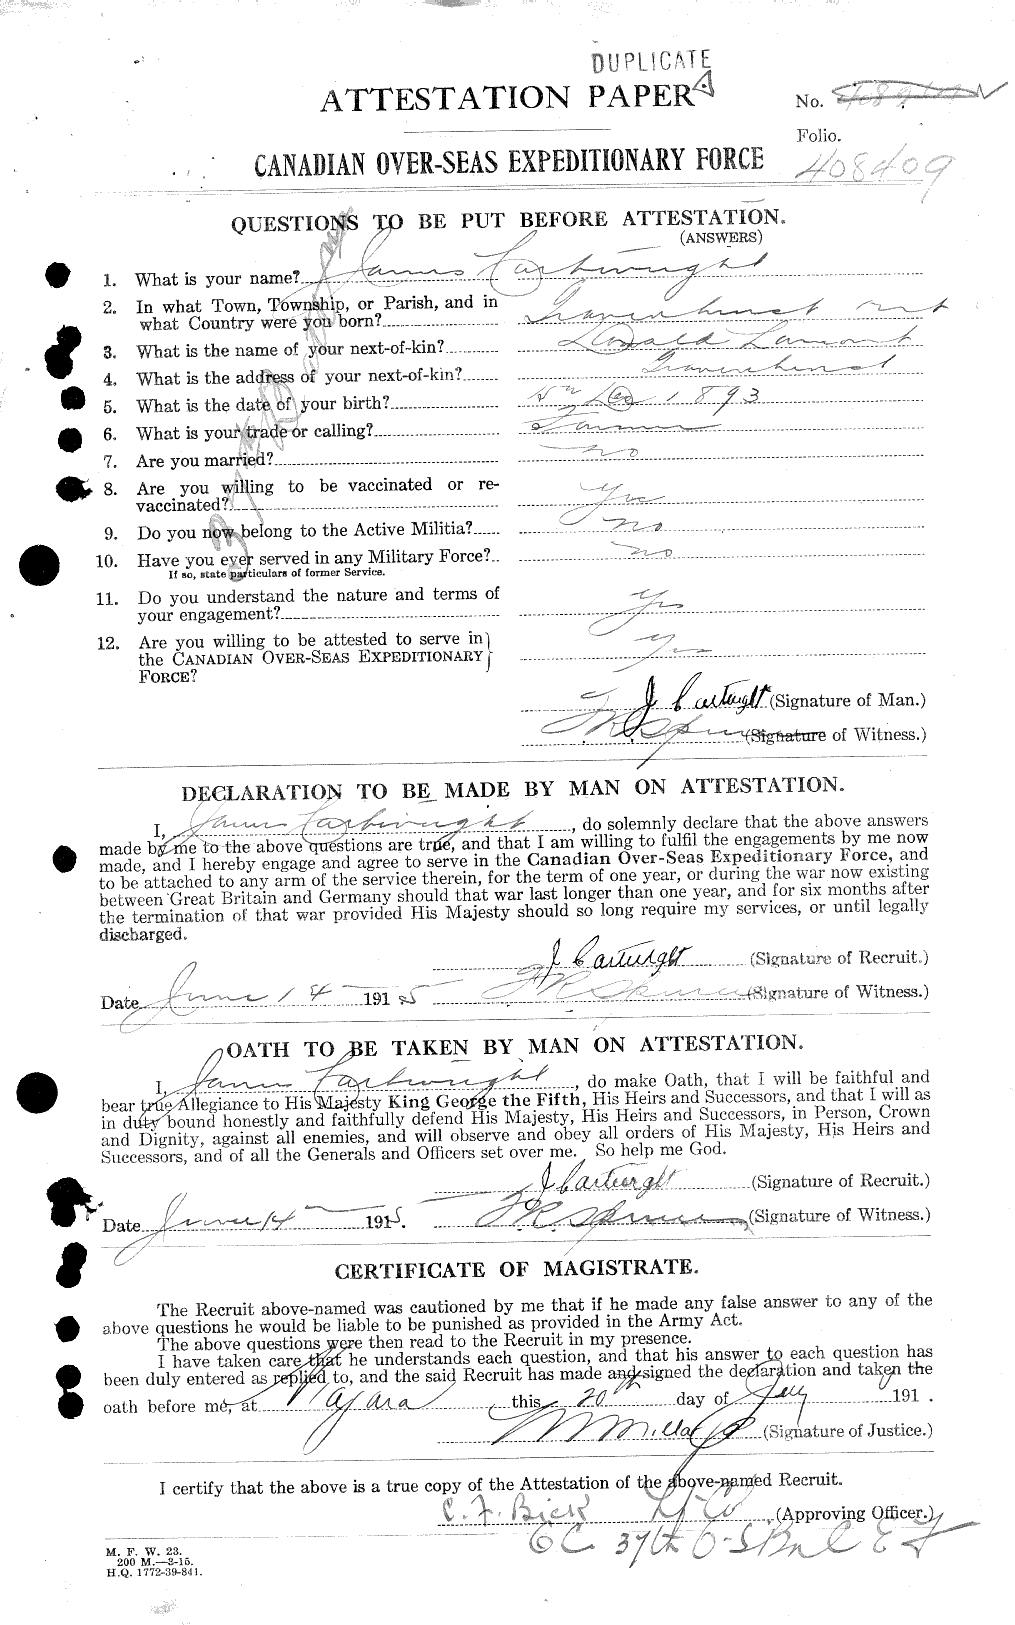 Personnel Records of the First World War - CEF 011593a